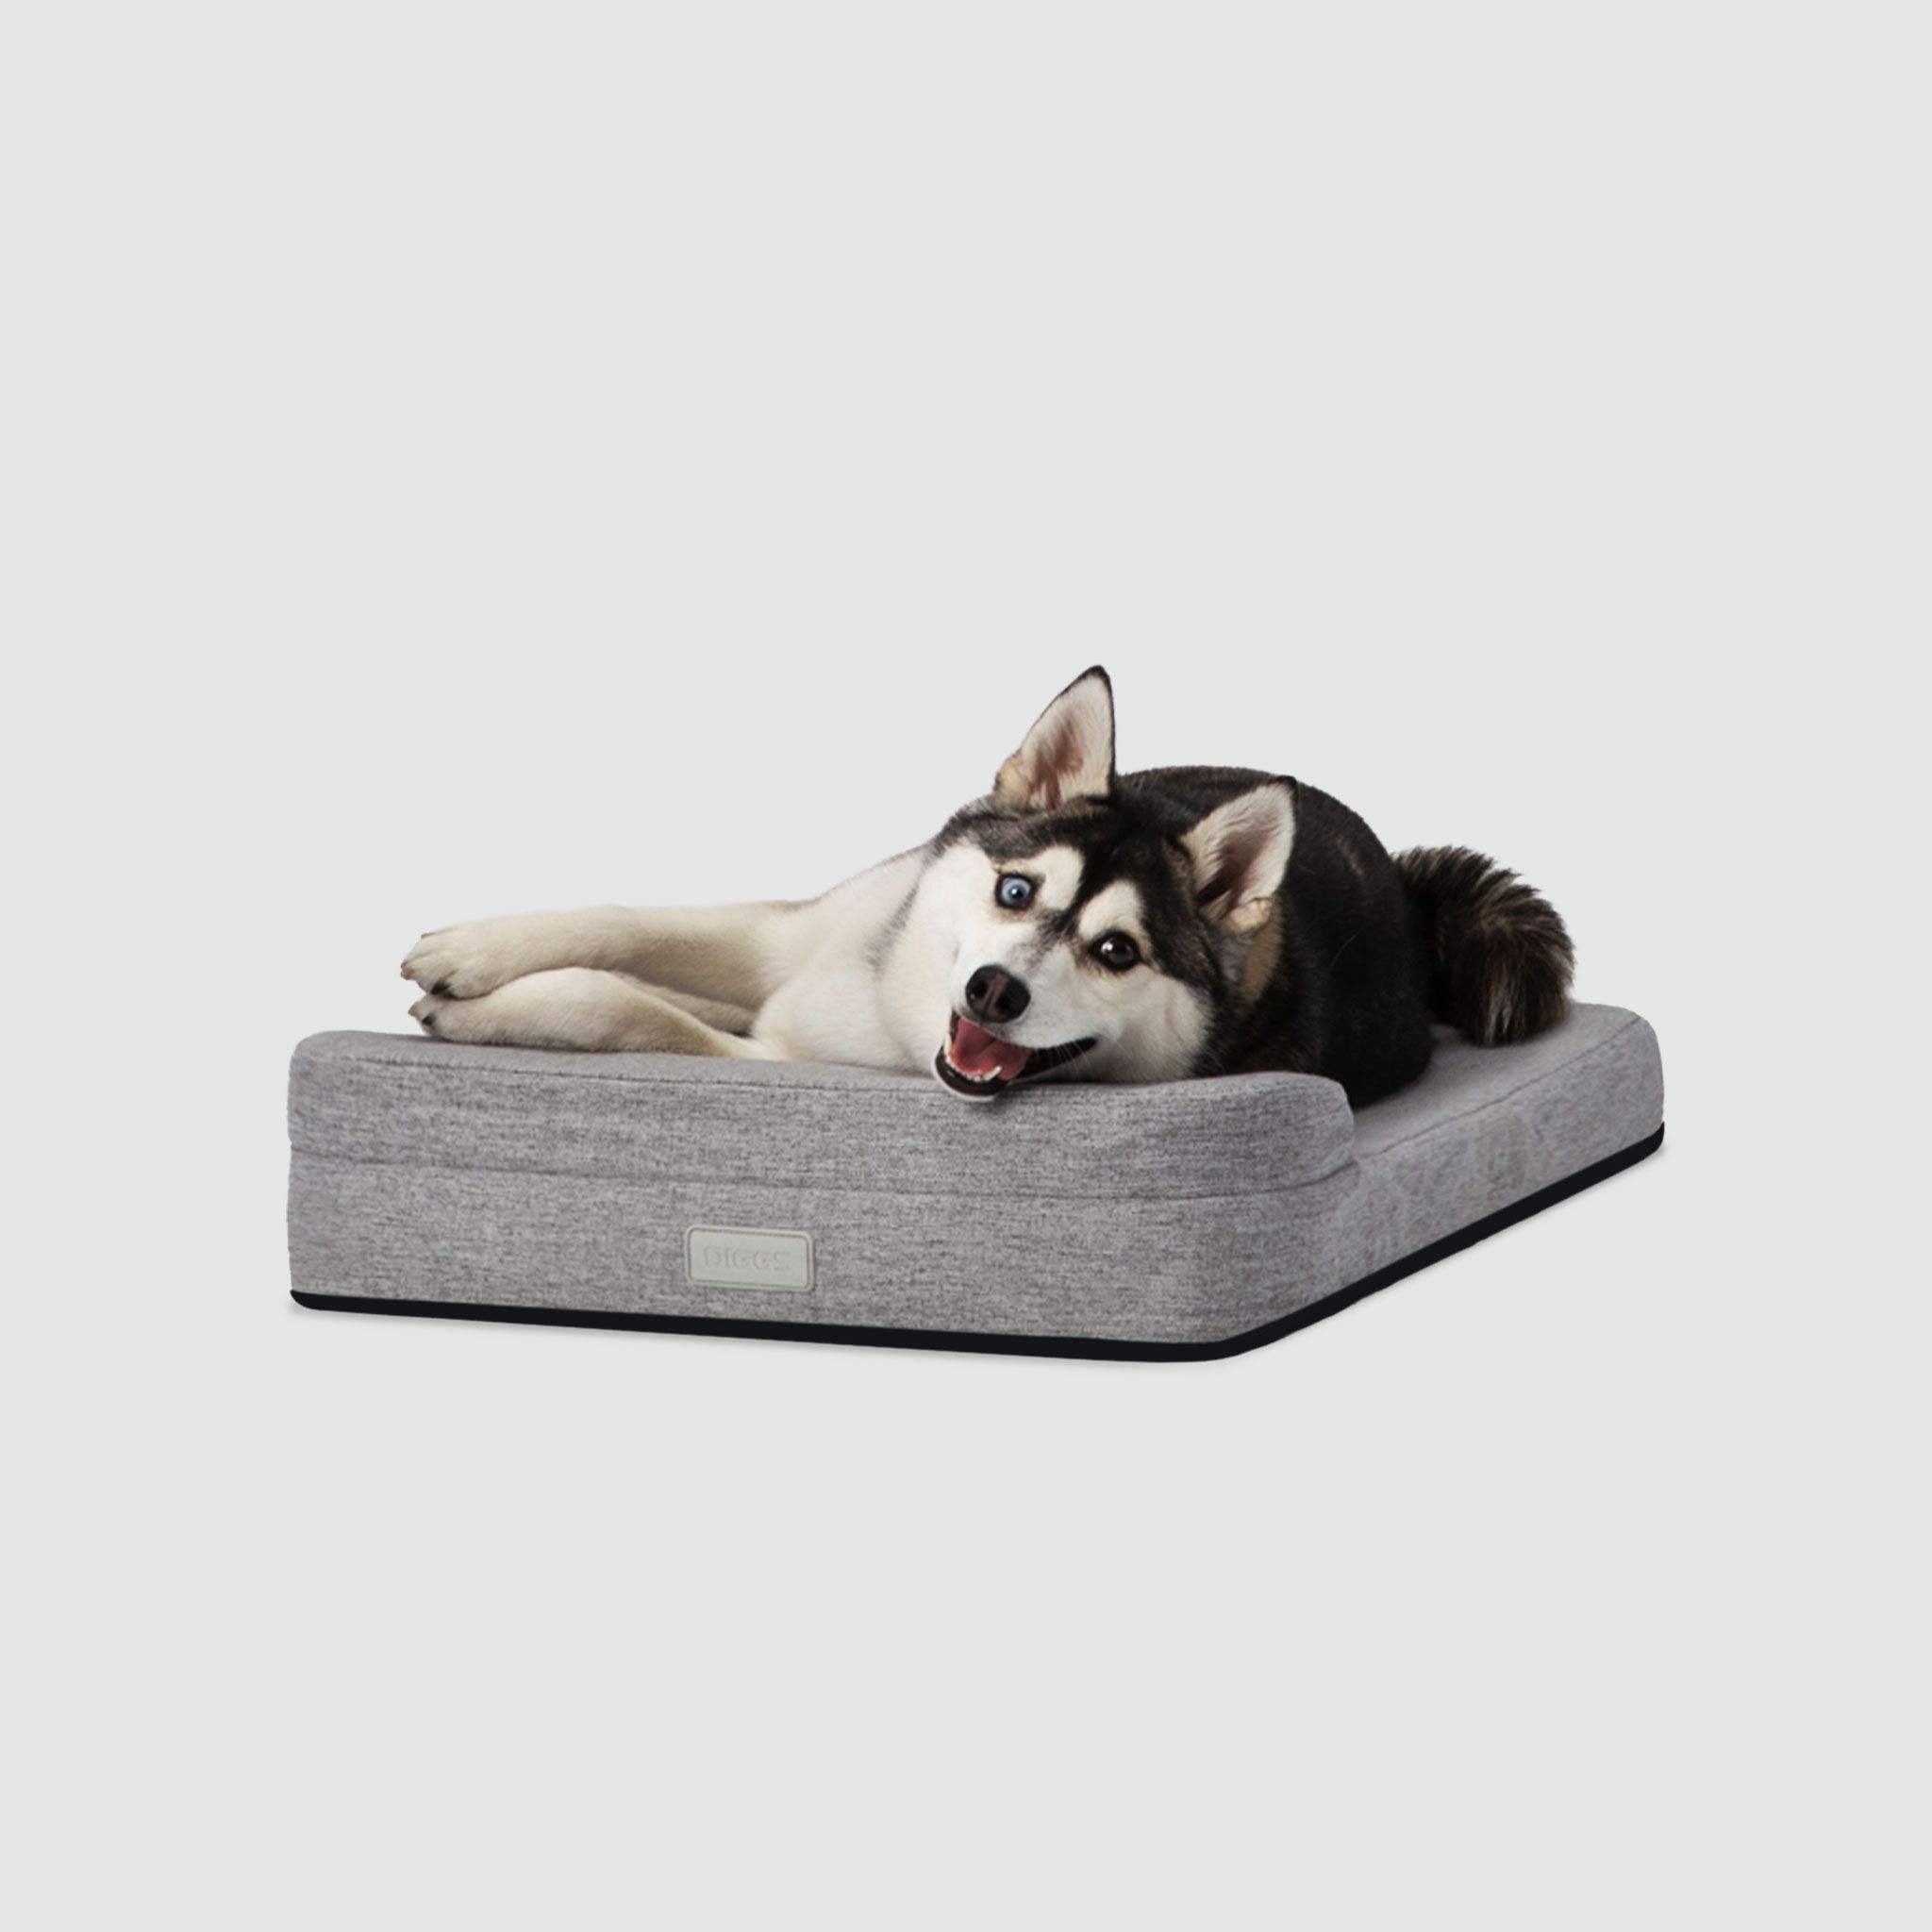 A husky dog laying on top of a dog bed